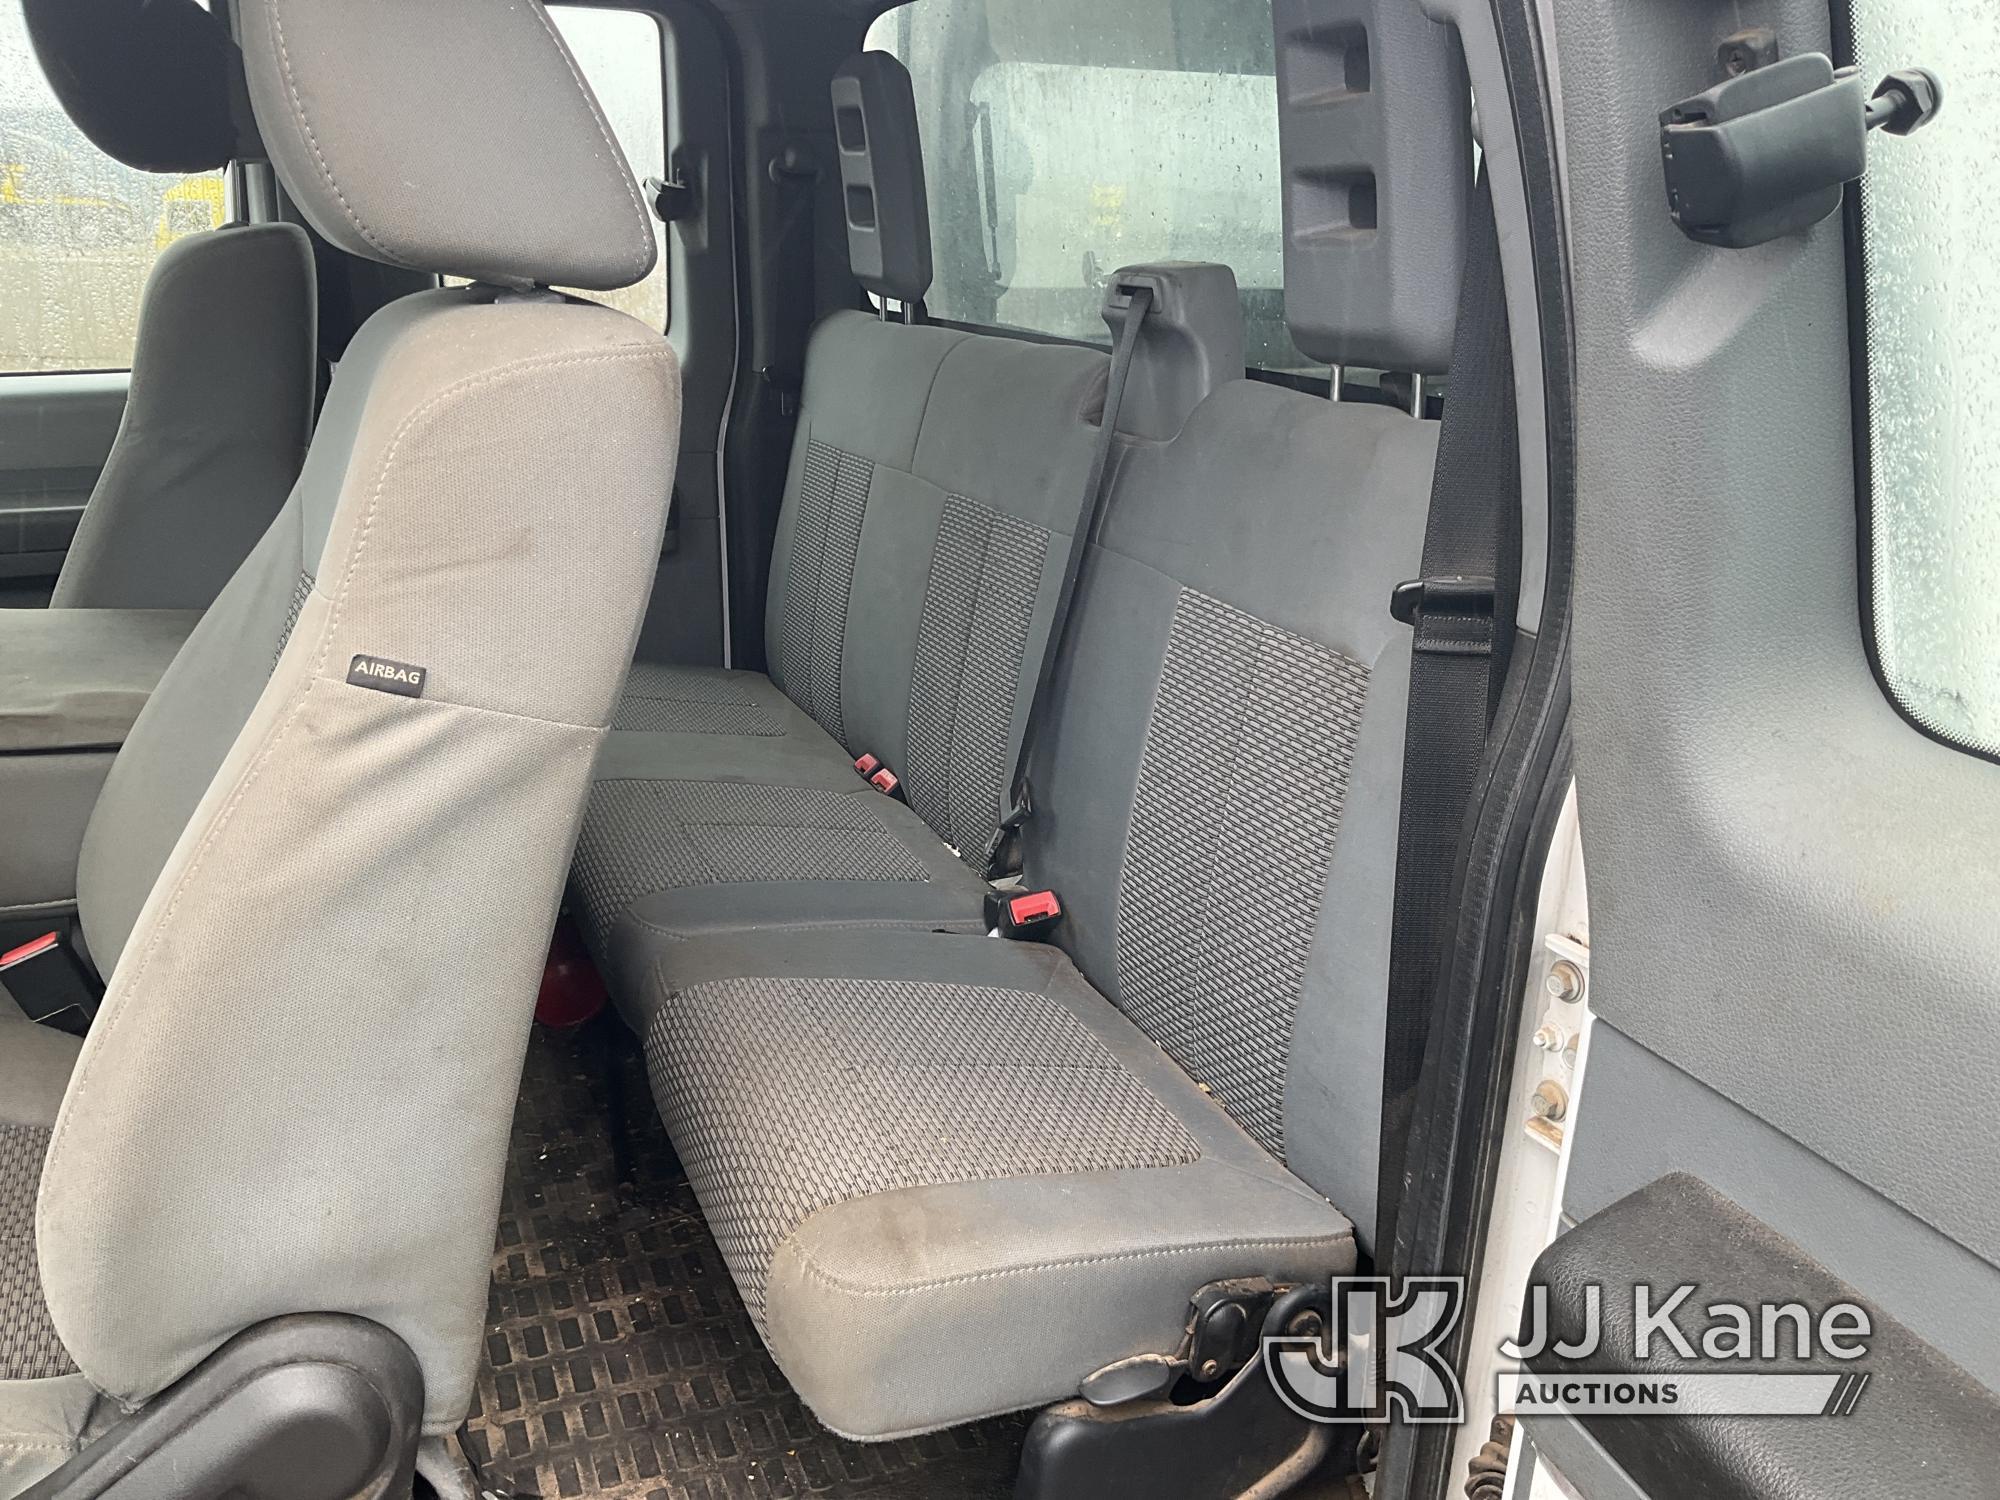 (Superior, WI) 2016 Ford F250 Extended-Cab Pickup Truck, Needs Radiator, Power Steering Pump, Altern